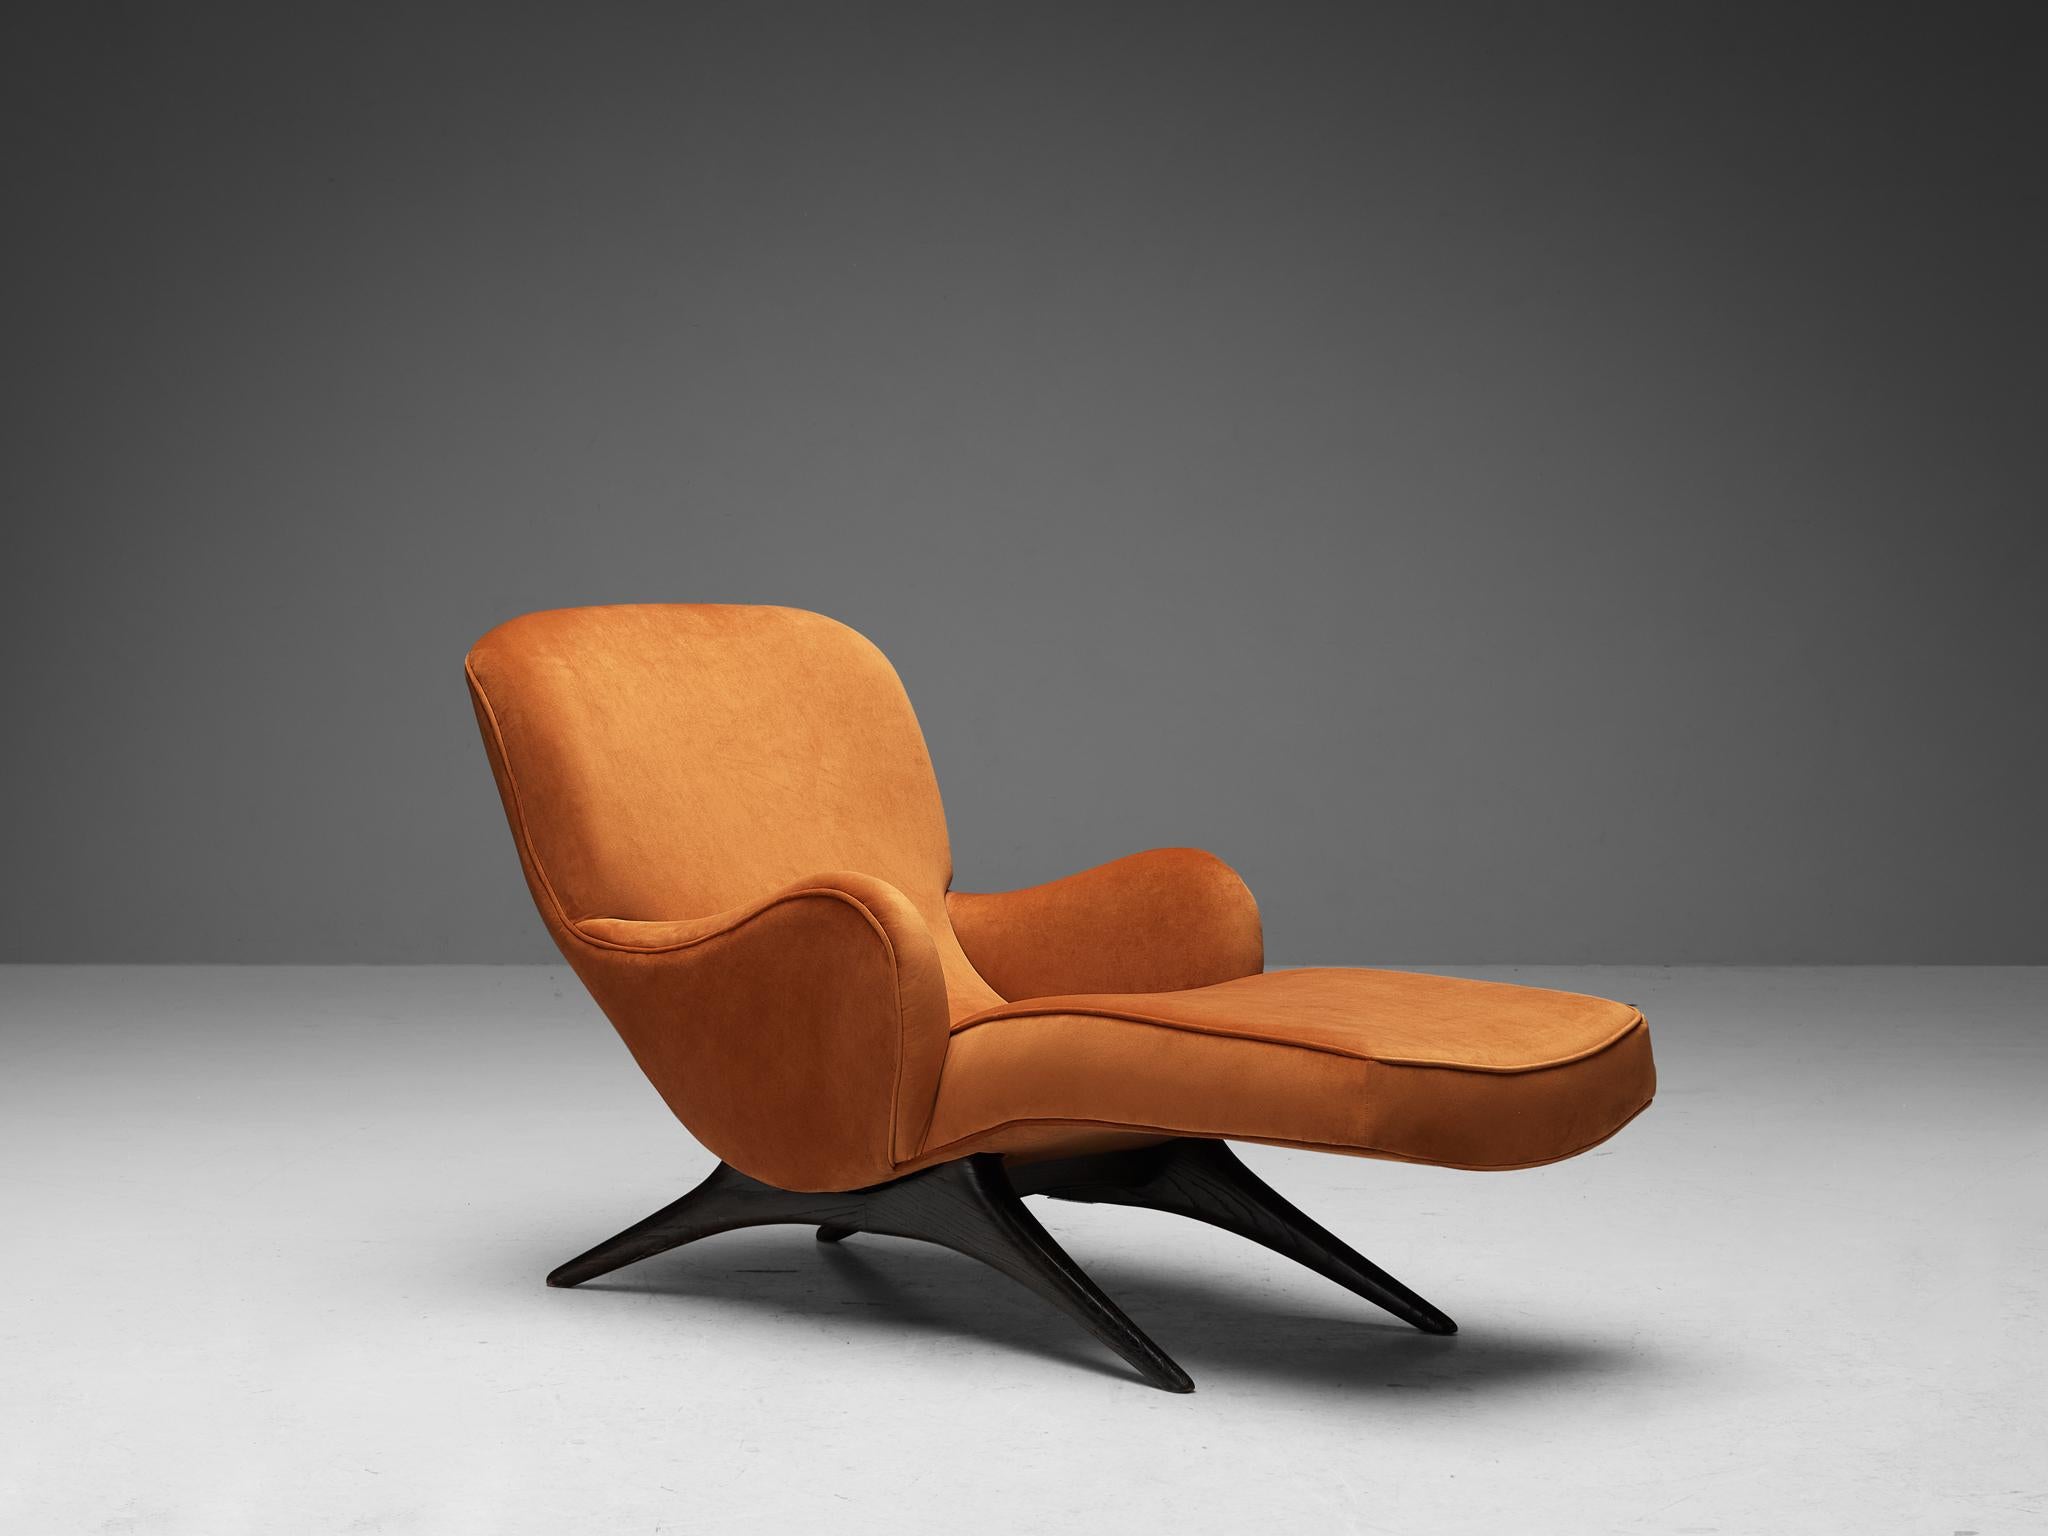 Vladimir Kagan, ‘Contour’ chaise longue, model ‘170C’, stained ash, velvet, United States, designed in 1950 and manufactured circa 1955.

This lounge chair is designed in 1950 by Vladimir Kagan and is part of the ‘Contour’ line. The pure beauty of